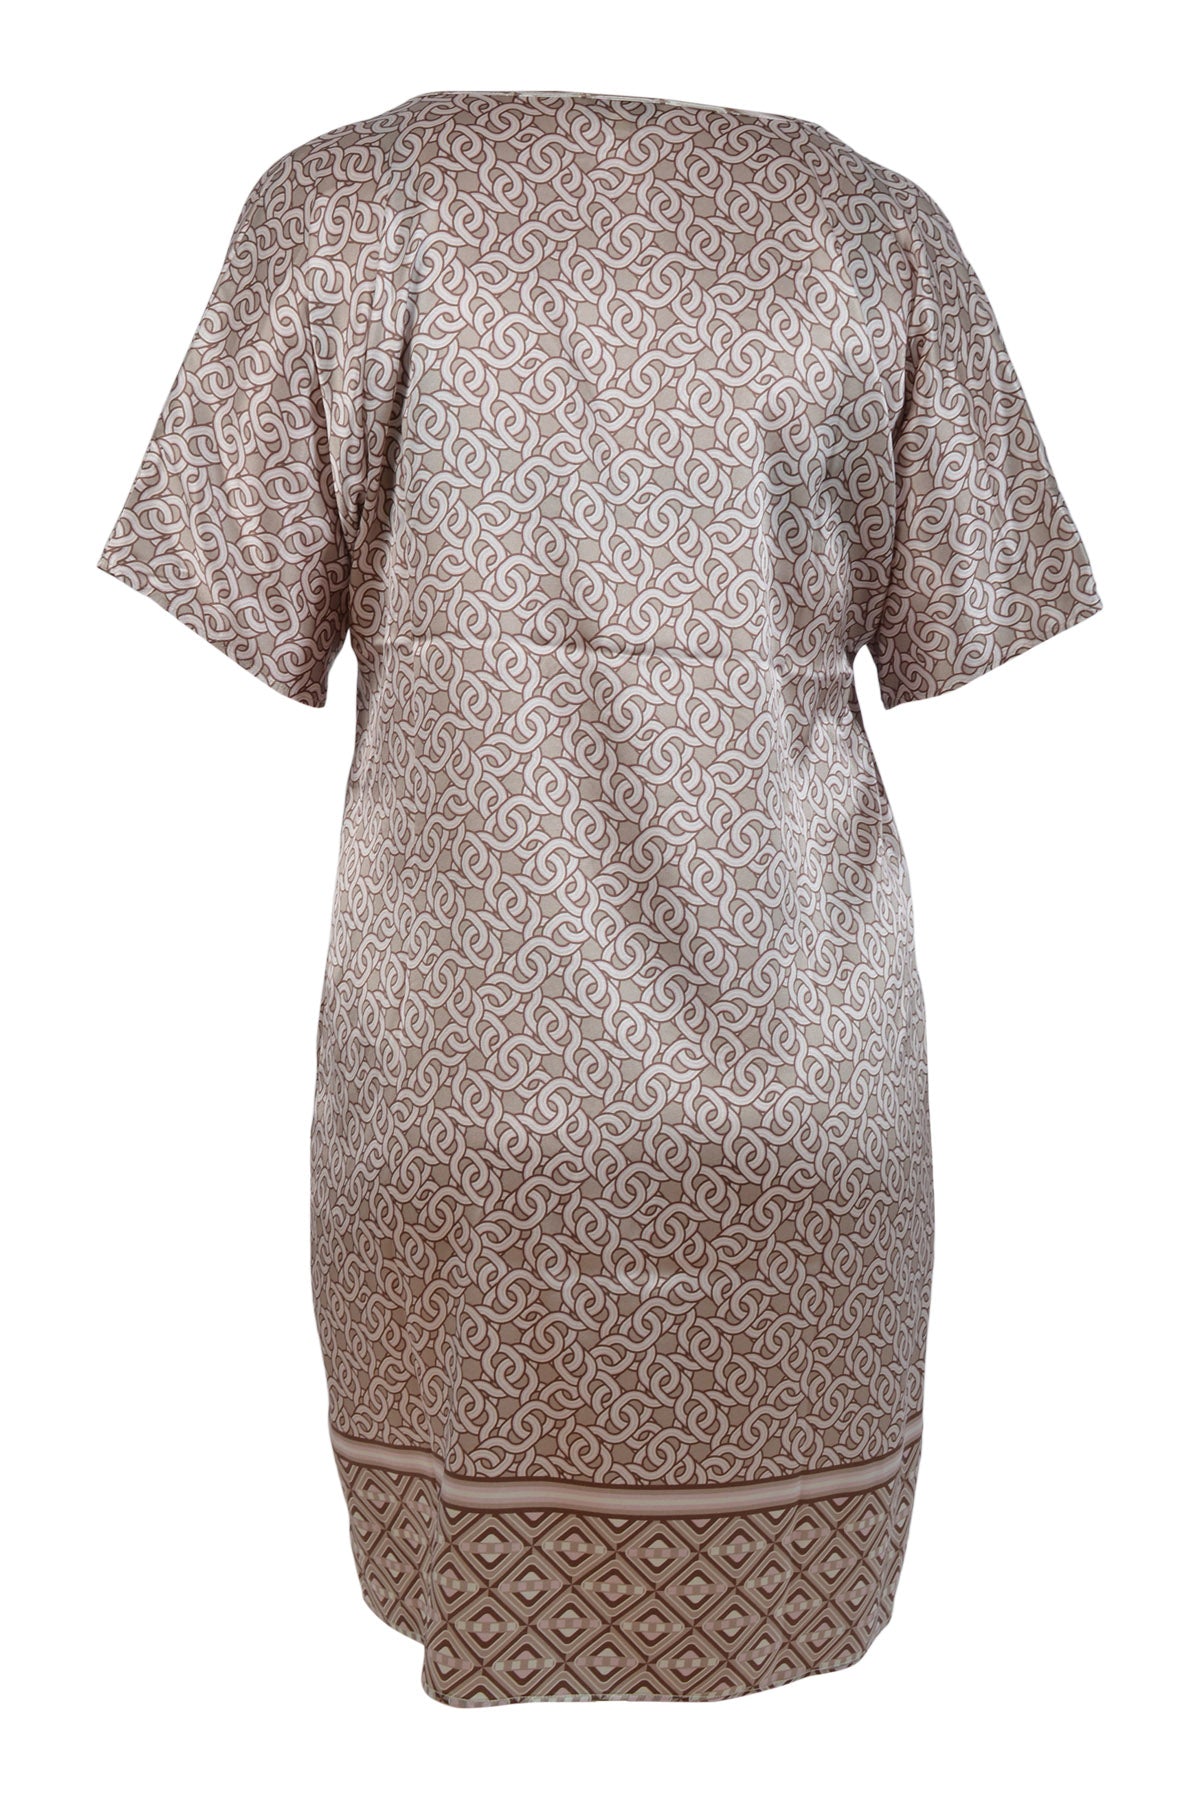 Charlotte Sparre Superdress 2951, Chainy Taupe